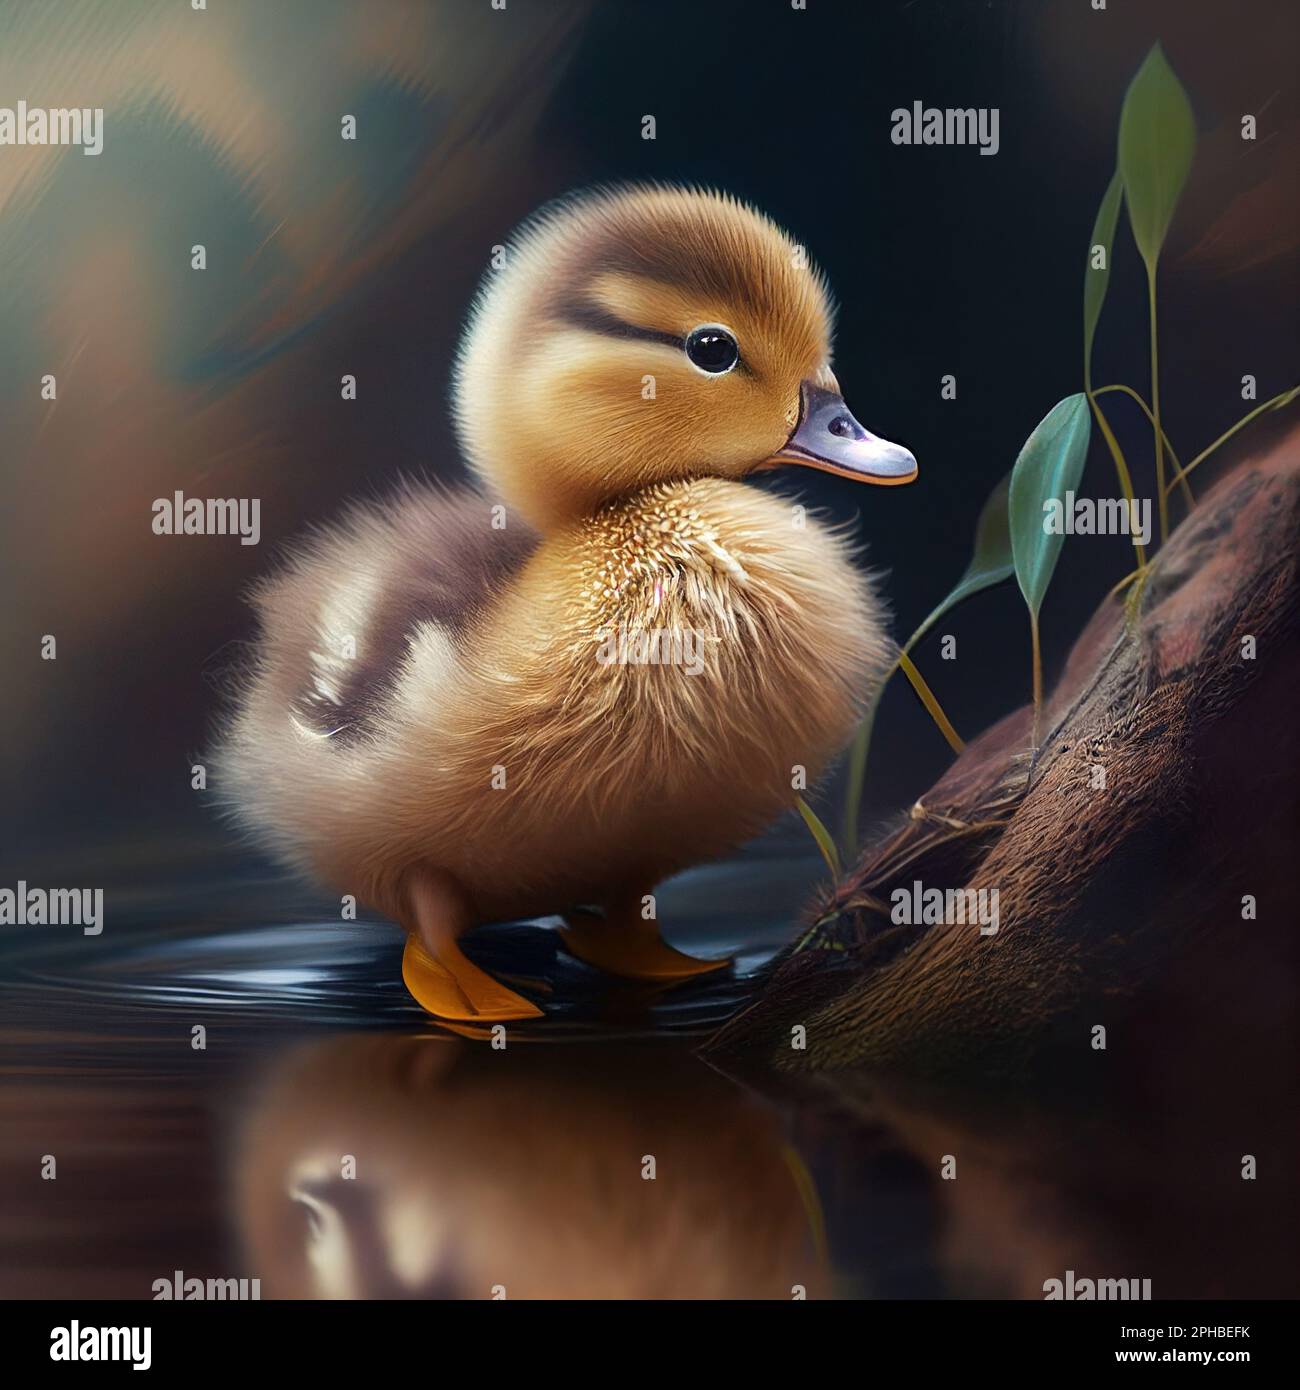 little baby duck cute standing on the lake image Stock Photo